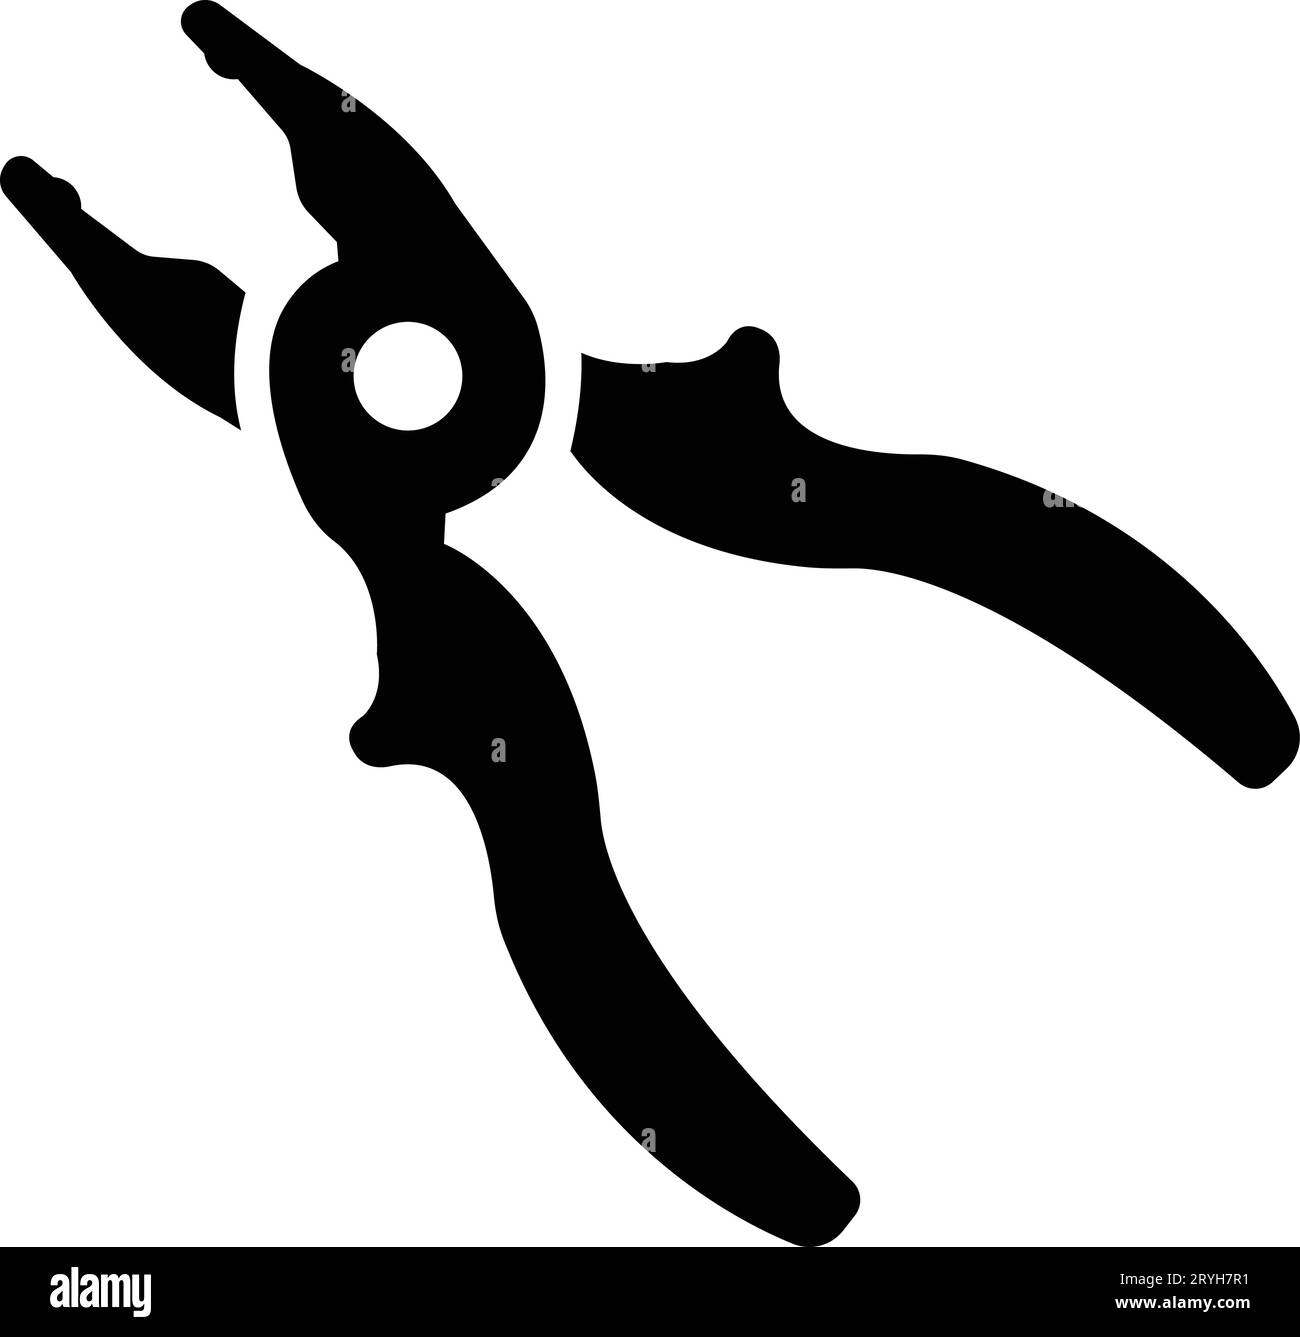 plier flat icon tool for construction work Stock Vector